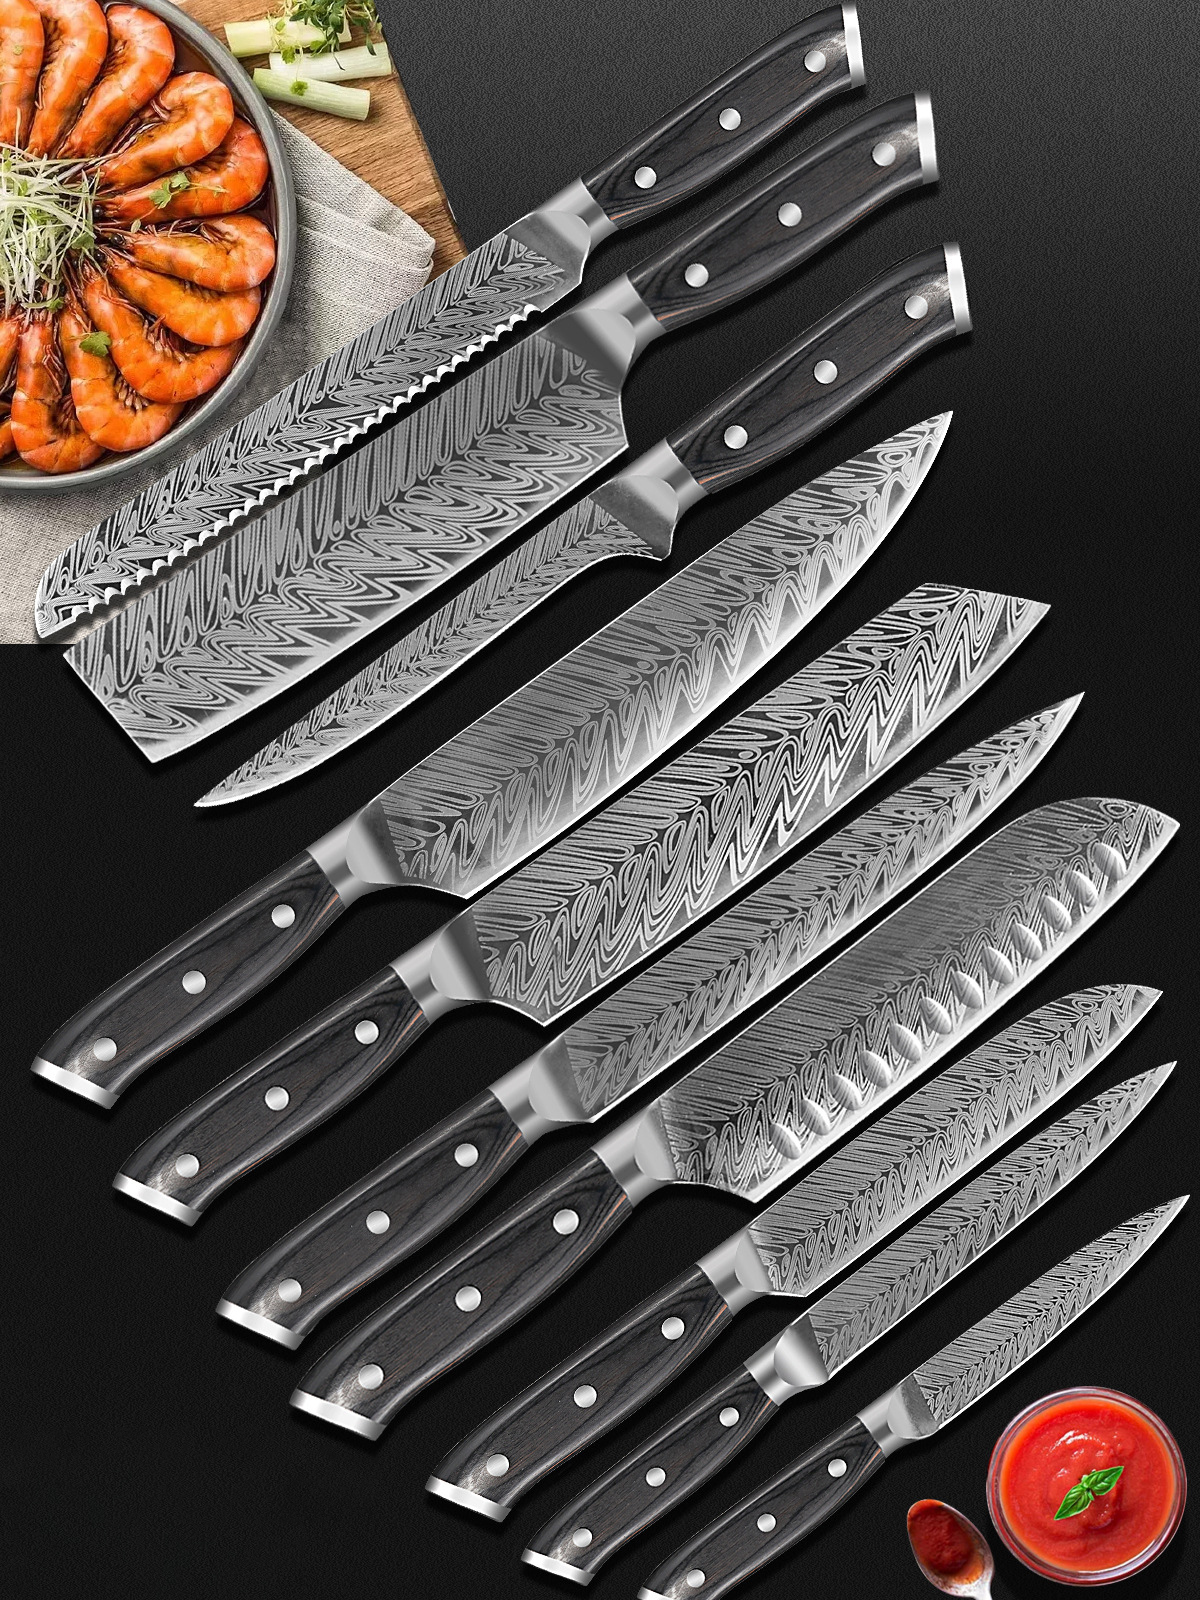 Damascus knife blades are usually made by forging together several layers of different types of steel. The most common method involves folding and welding layers of high-carbon steel and softer steel, creating a distinctive pattern on the blade known as the Damascus pattern. This pattern is achieved by repeatedly heating, folding and hammering the steel, creating a beautiful wavy or speckled appearance.